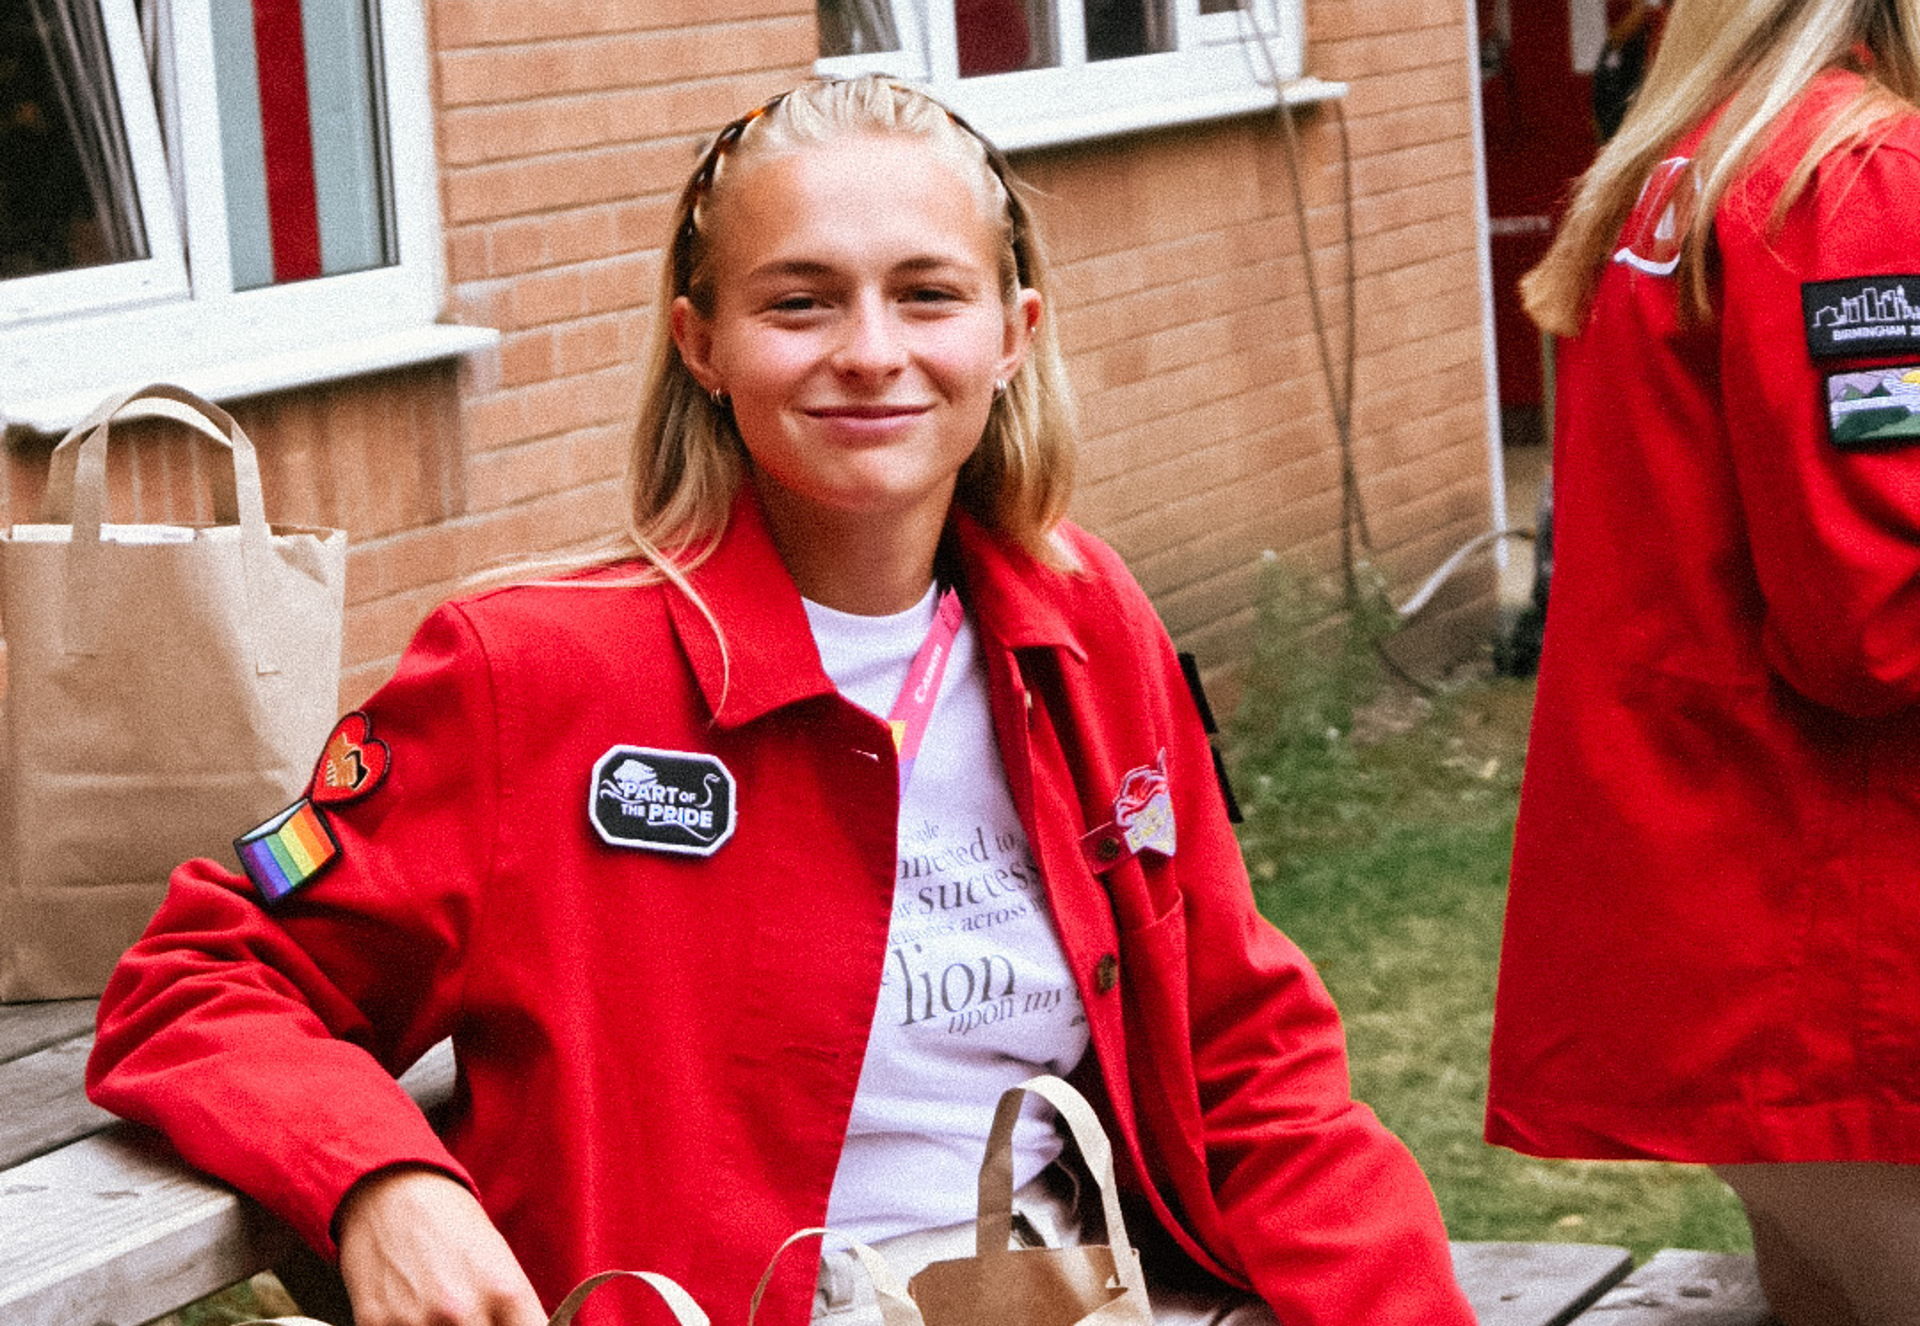 A young woman with blond hair and a red jacket sits on a bench, smiling at the camera.